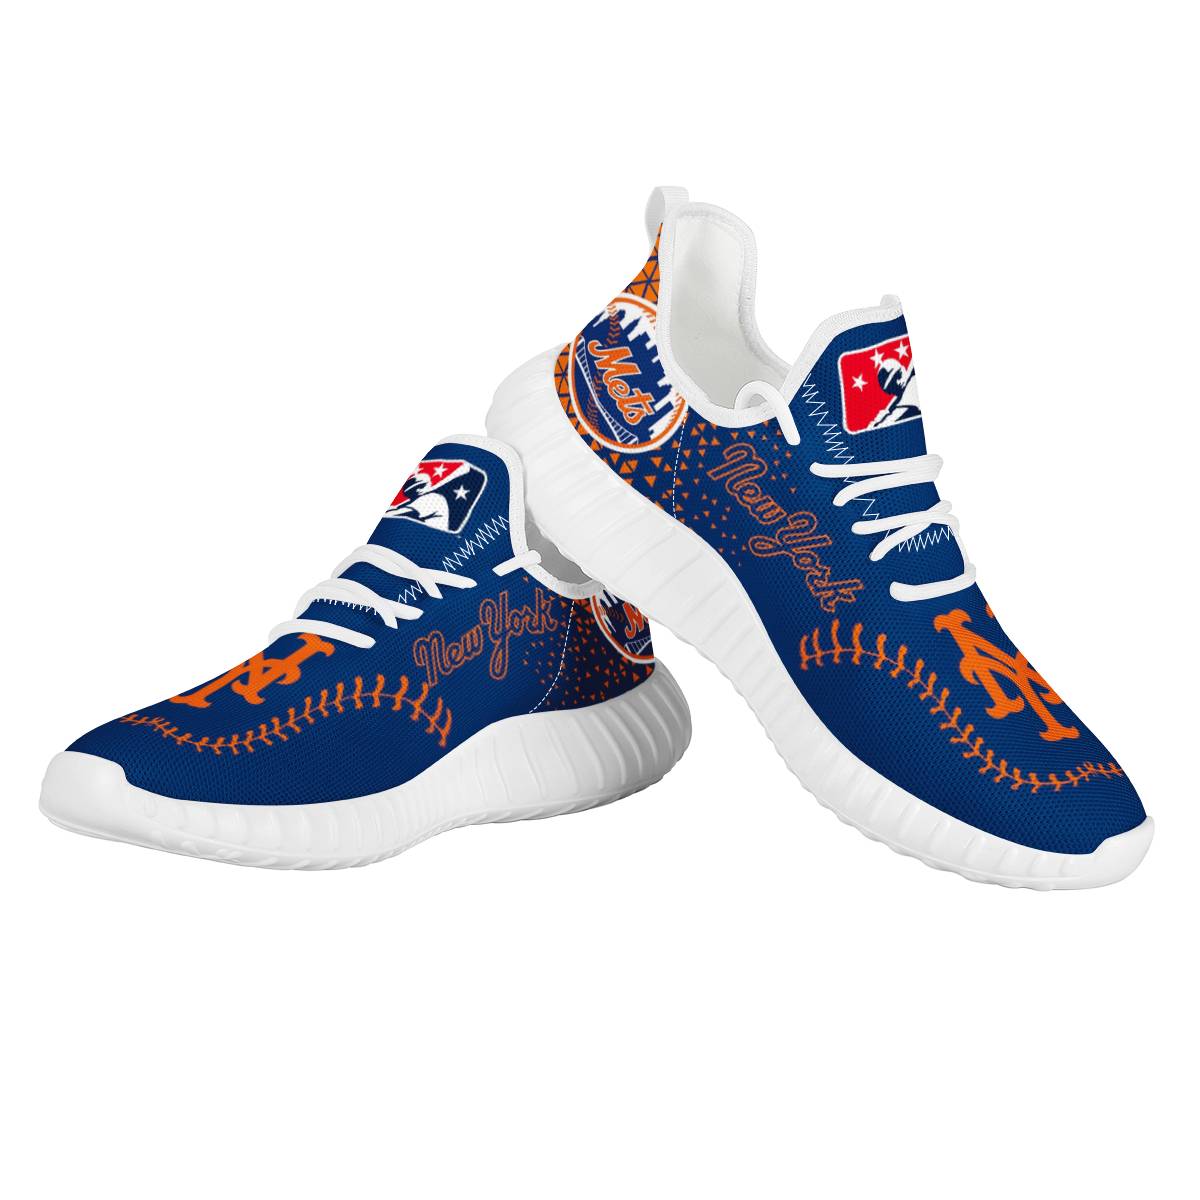 New York Mets shoes